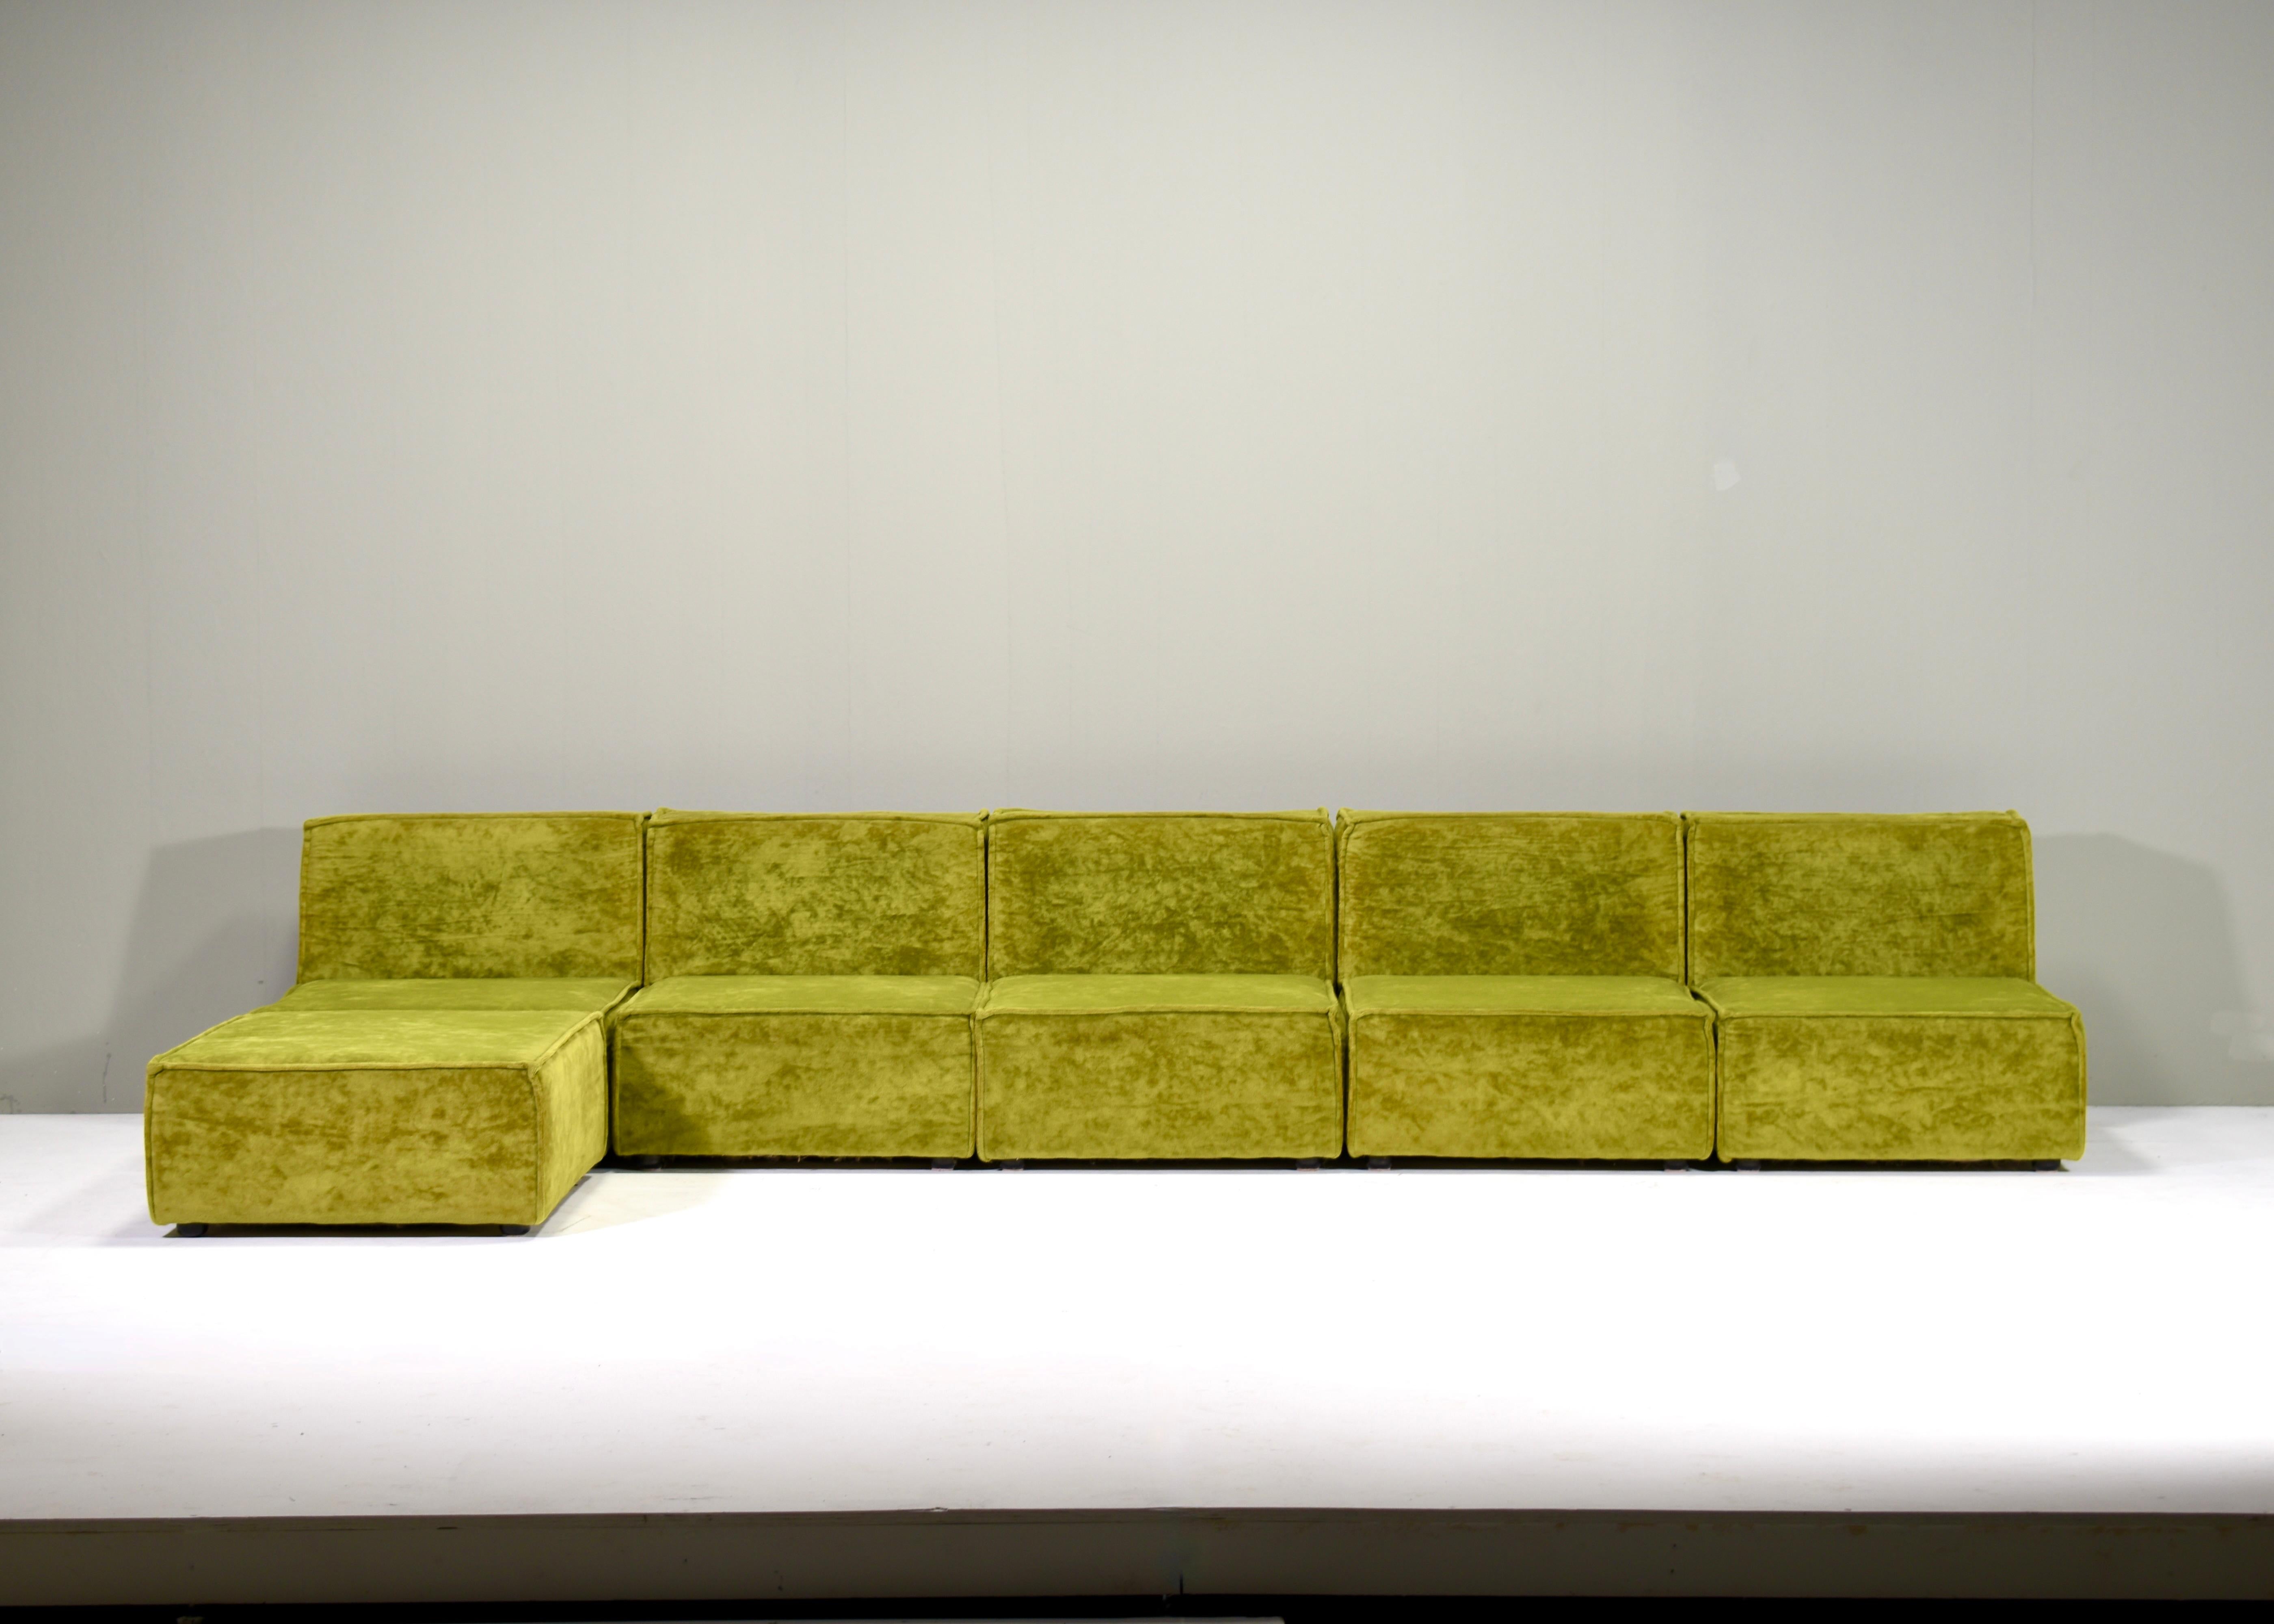 Groovy modular sectional sofa in original green velvet fabric, circa 1970.
Designer: Unknown
Manufacturer: Unknown
Model: Sectional sofa
Design period: 1970’s
Date of manufacturing: 1970’s
Size WDH in cm: 
one element 70x85x63 seat height 32